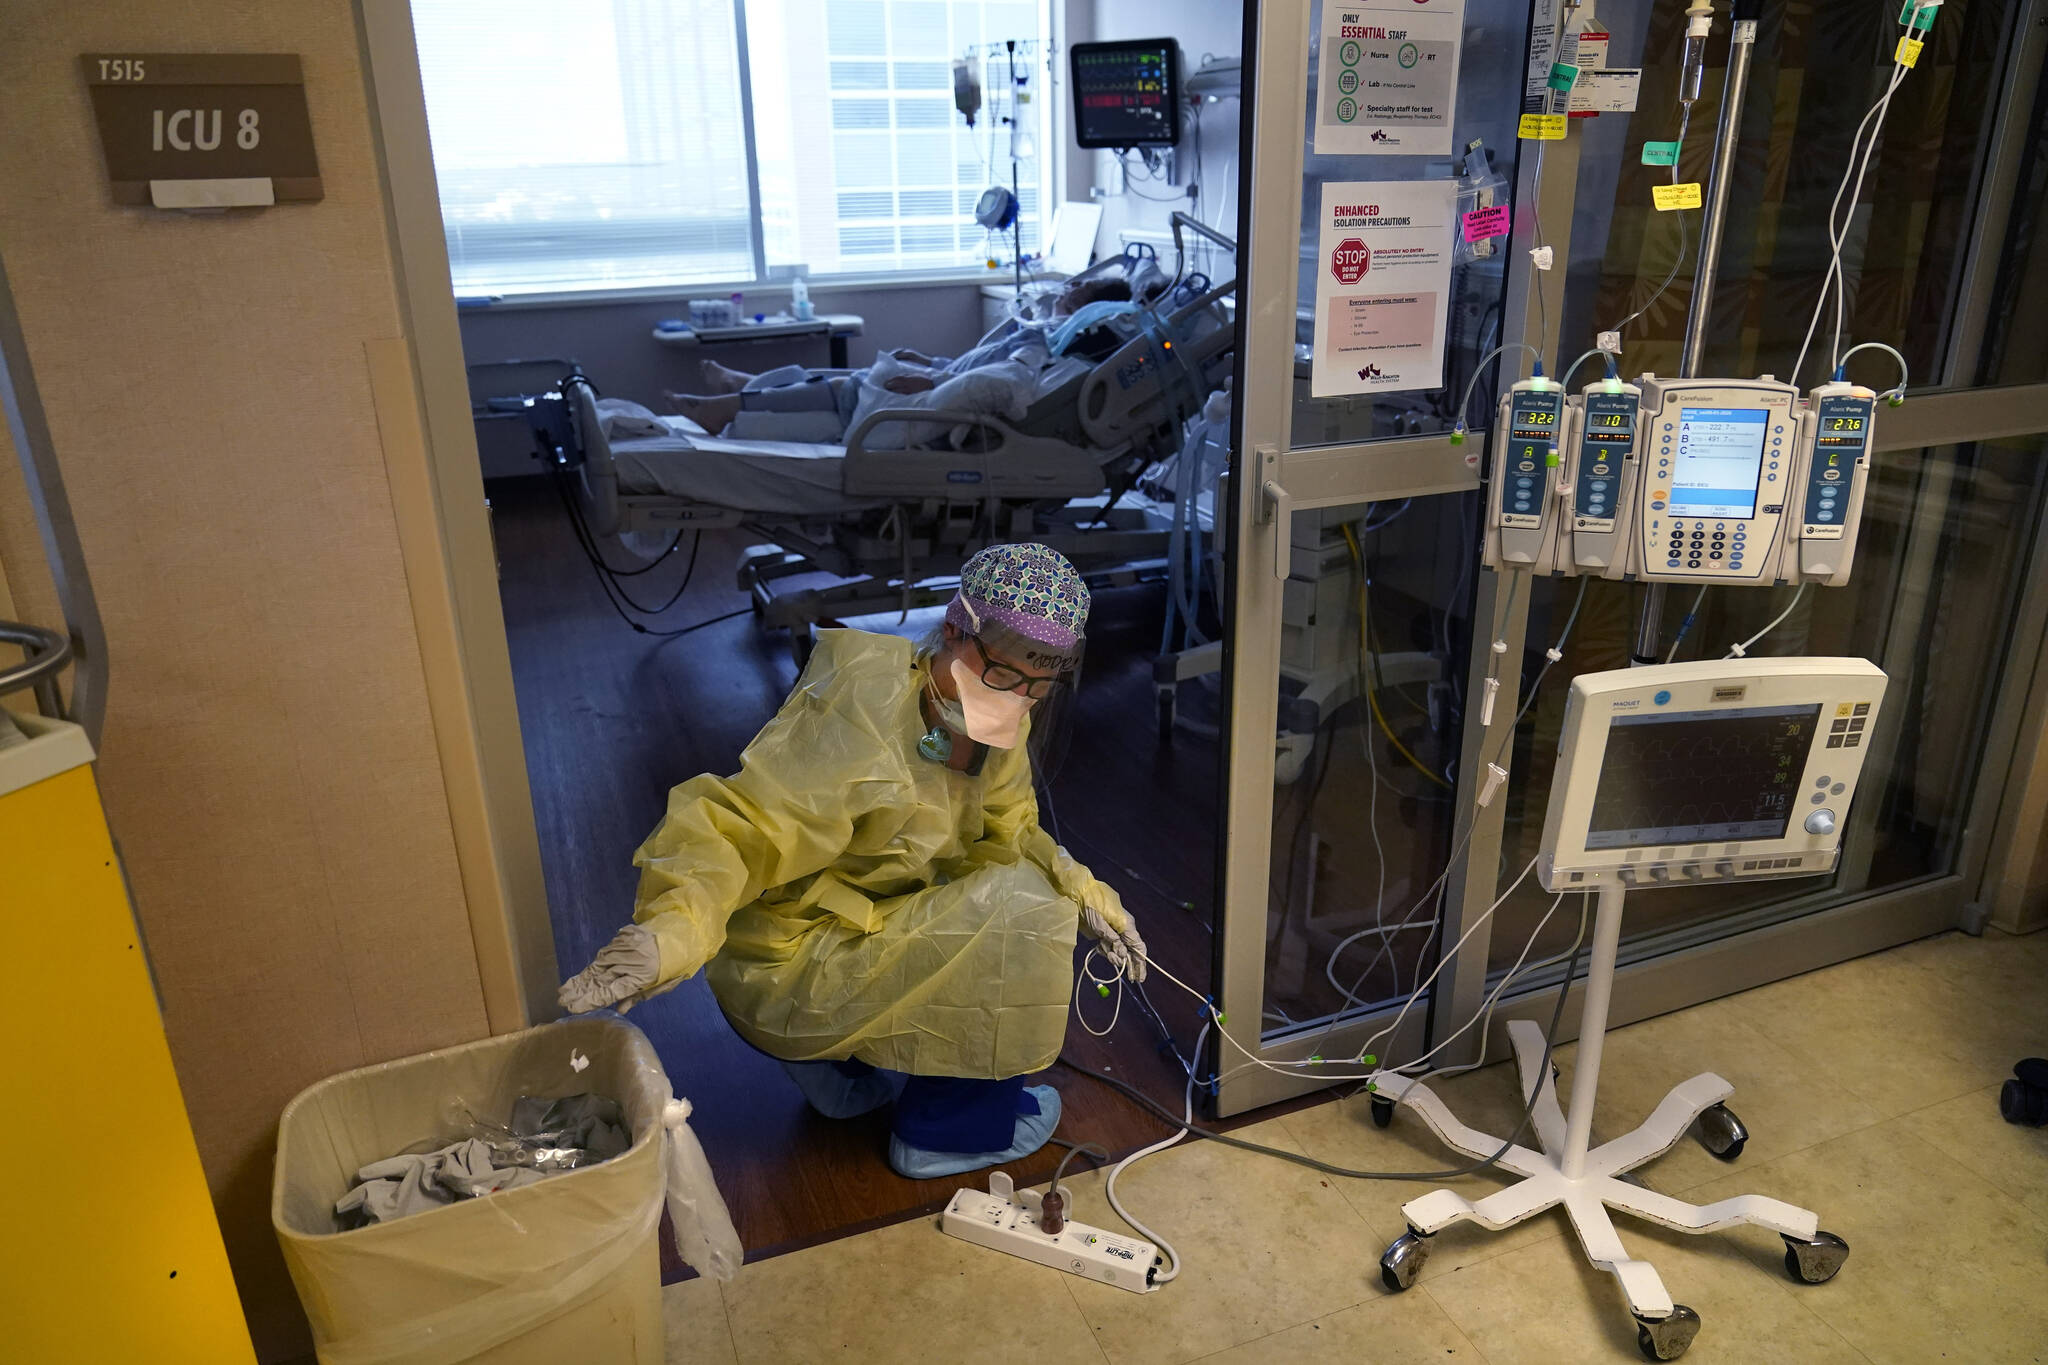 Associated Press
An ICU nurse moves electrical cords for medical machines,outside the room of a patient suffering from COVID-19, in an intensive care unit at the Willis-Knighton Medical Center in Shreveport, Louisiana. The COVID-19 pandemic has created a nurse staffing crisis that is forcing many U.S. hospitals to pay top dollar to get the help they need to handle the crush of patients this summer.